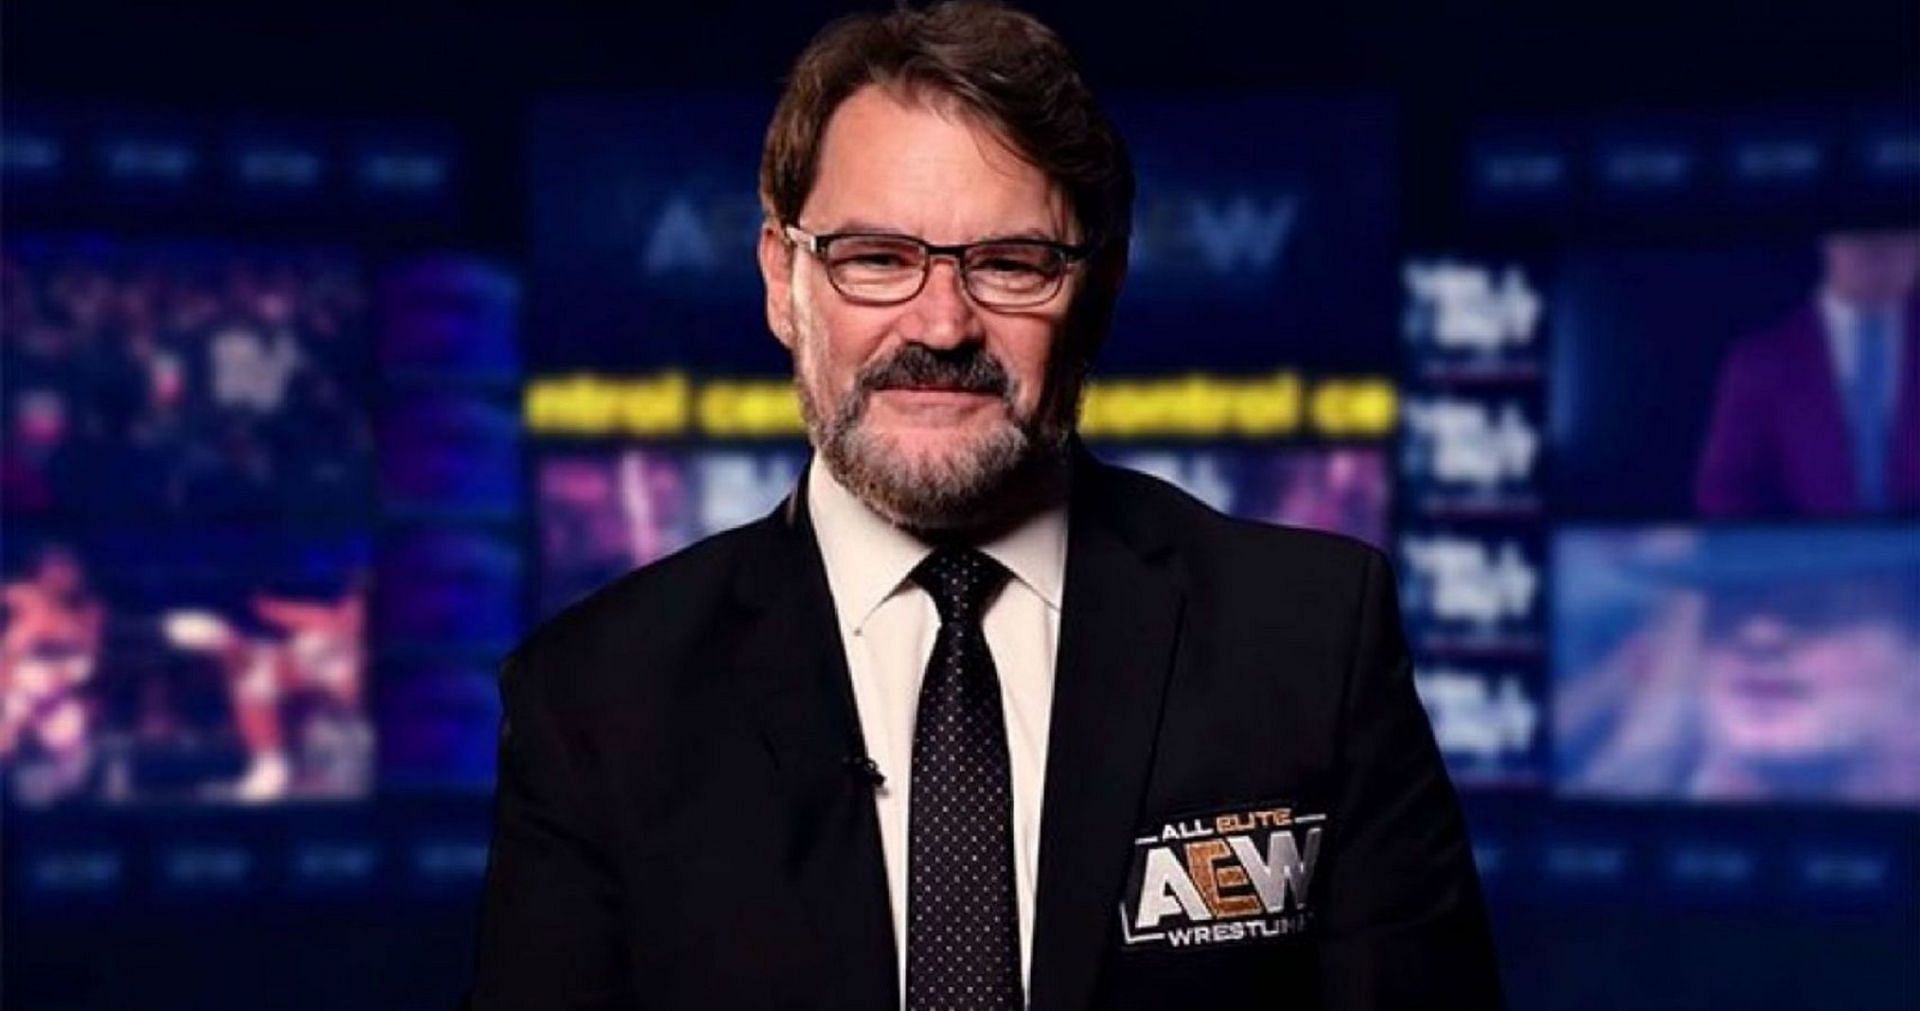 Did Tony Schiavone give out a secret?